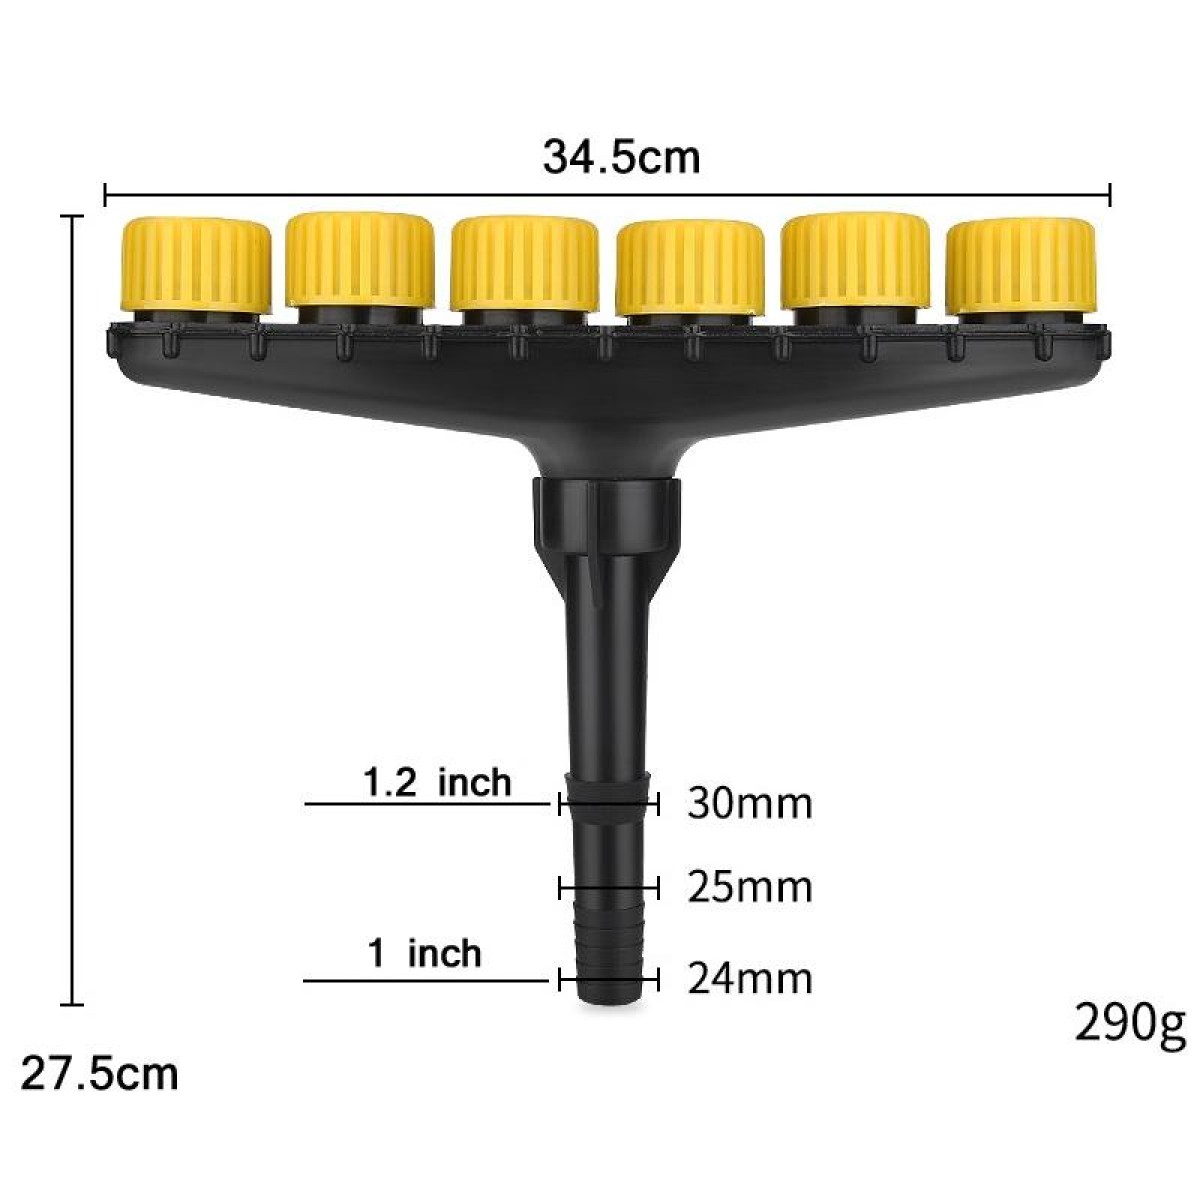 DKSSQ Gardening Watering Sprinkler Nozzle, Specification: 6 Head With 1 inch/1.2 inch Interface